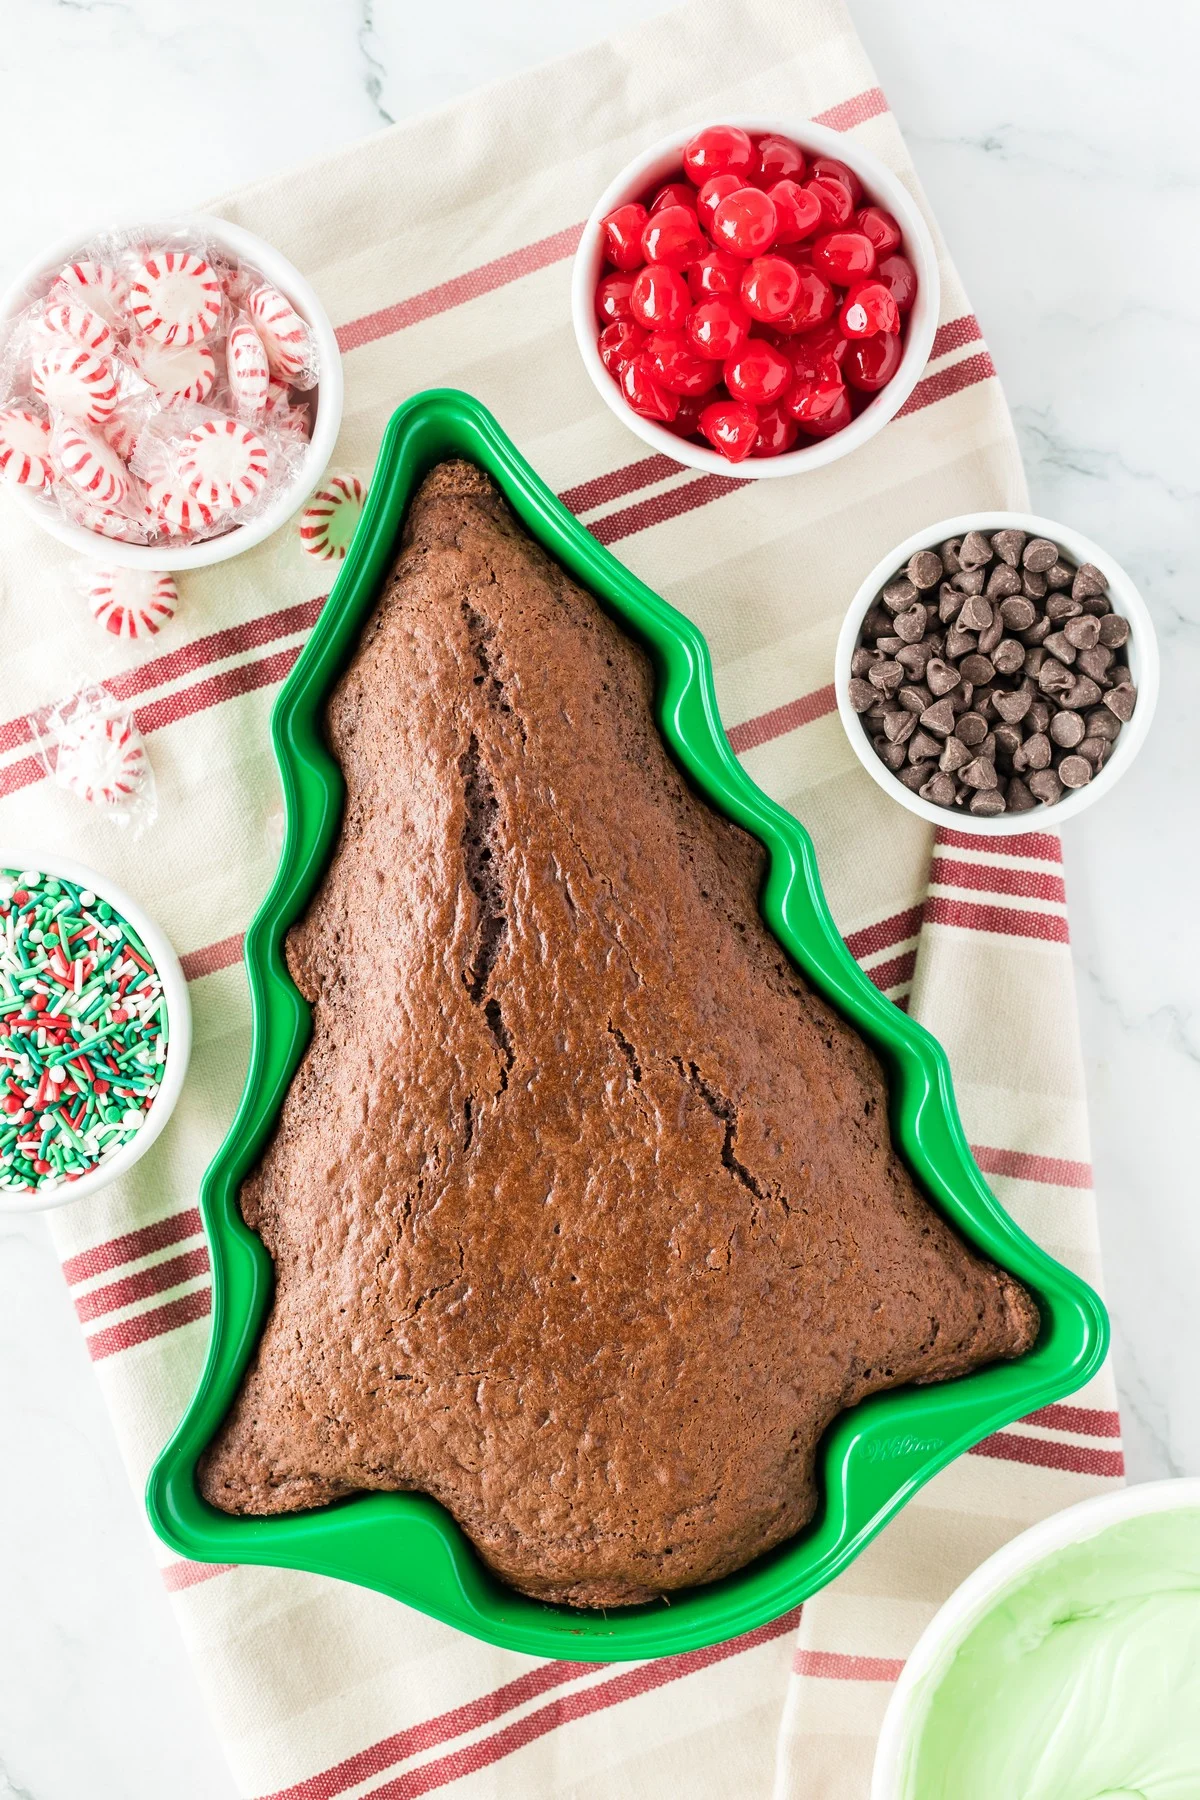 https://www.southerncravings.com/wp-content/uploads/2022/10/Christmas-Tree-Cake-7.jpg.webp